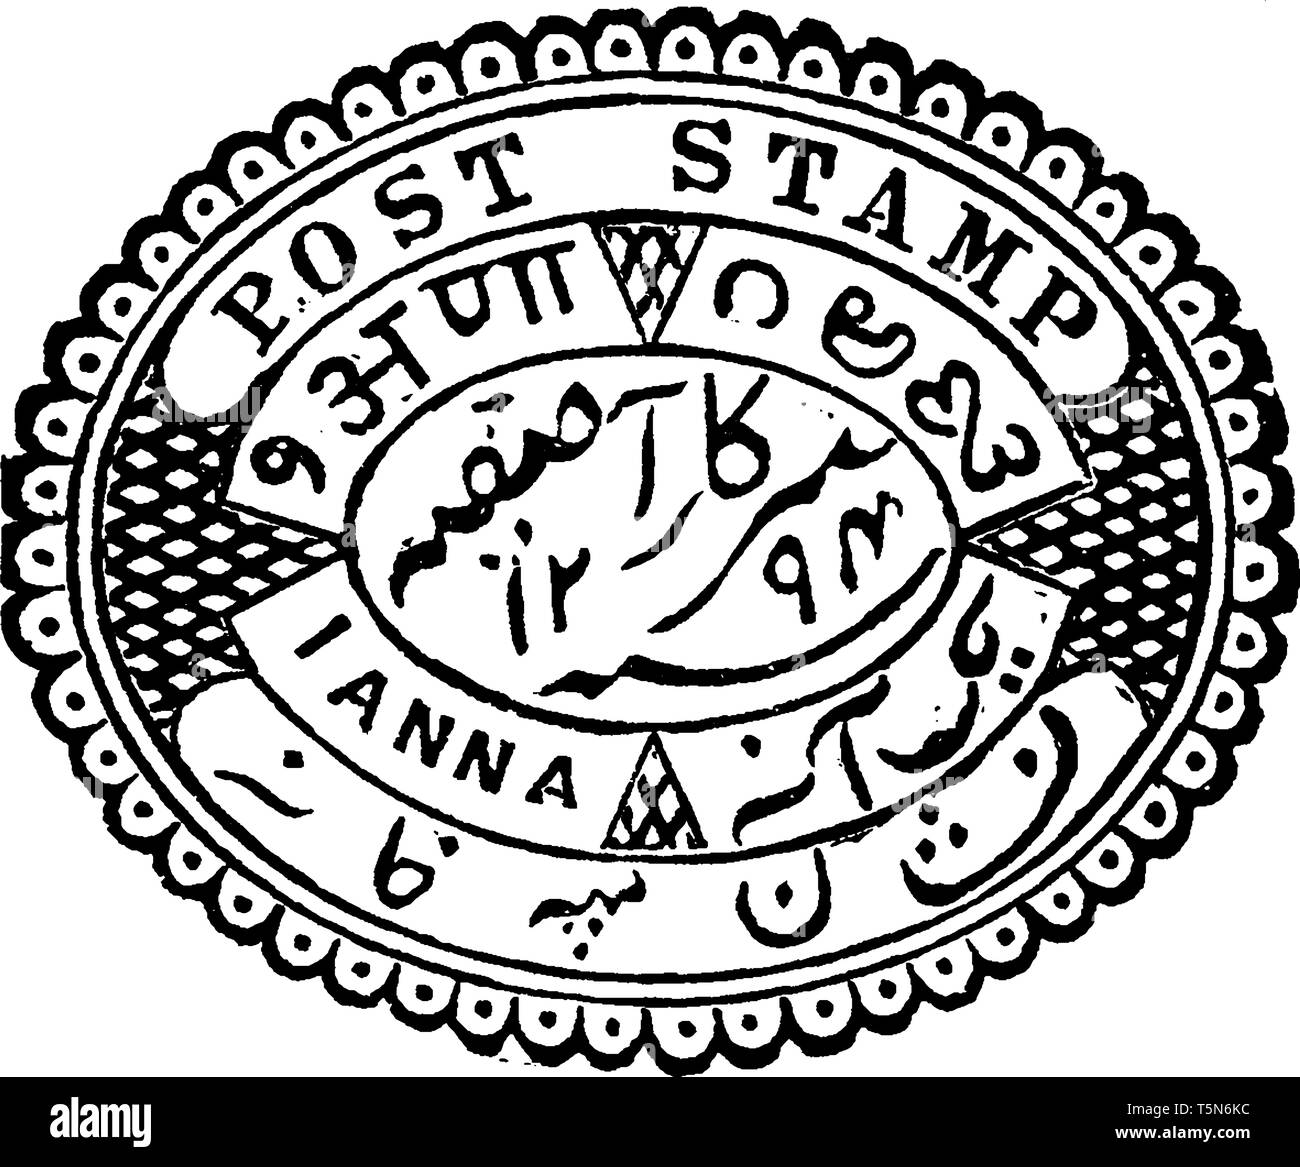 This image represents India Envelope of 1 Anna from 1878 to1879, vintage line drawing or engraving illustration. Stock Vector